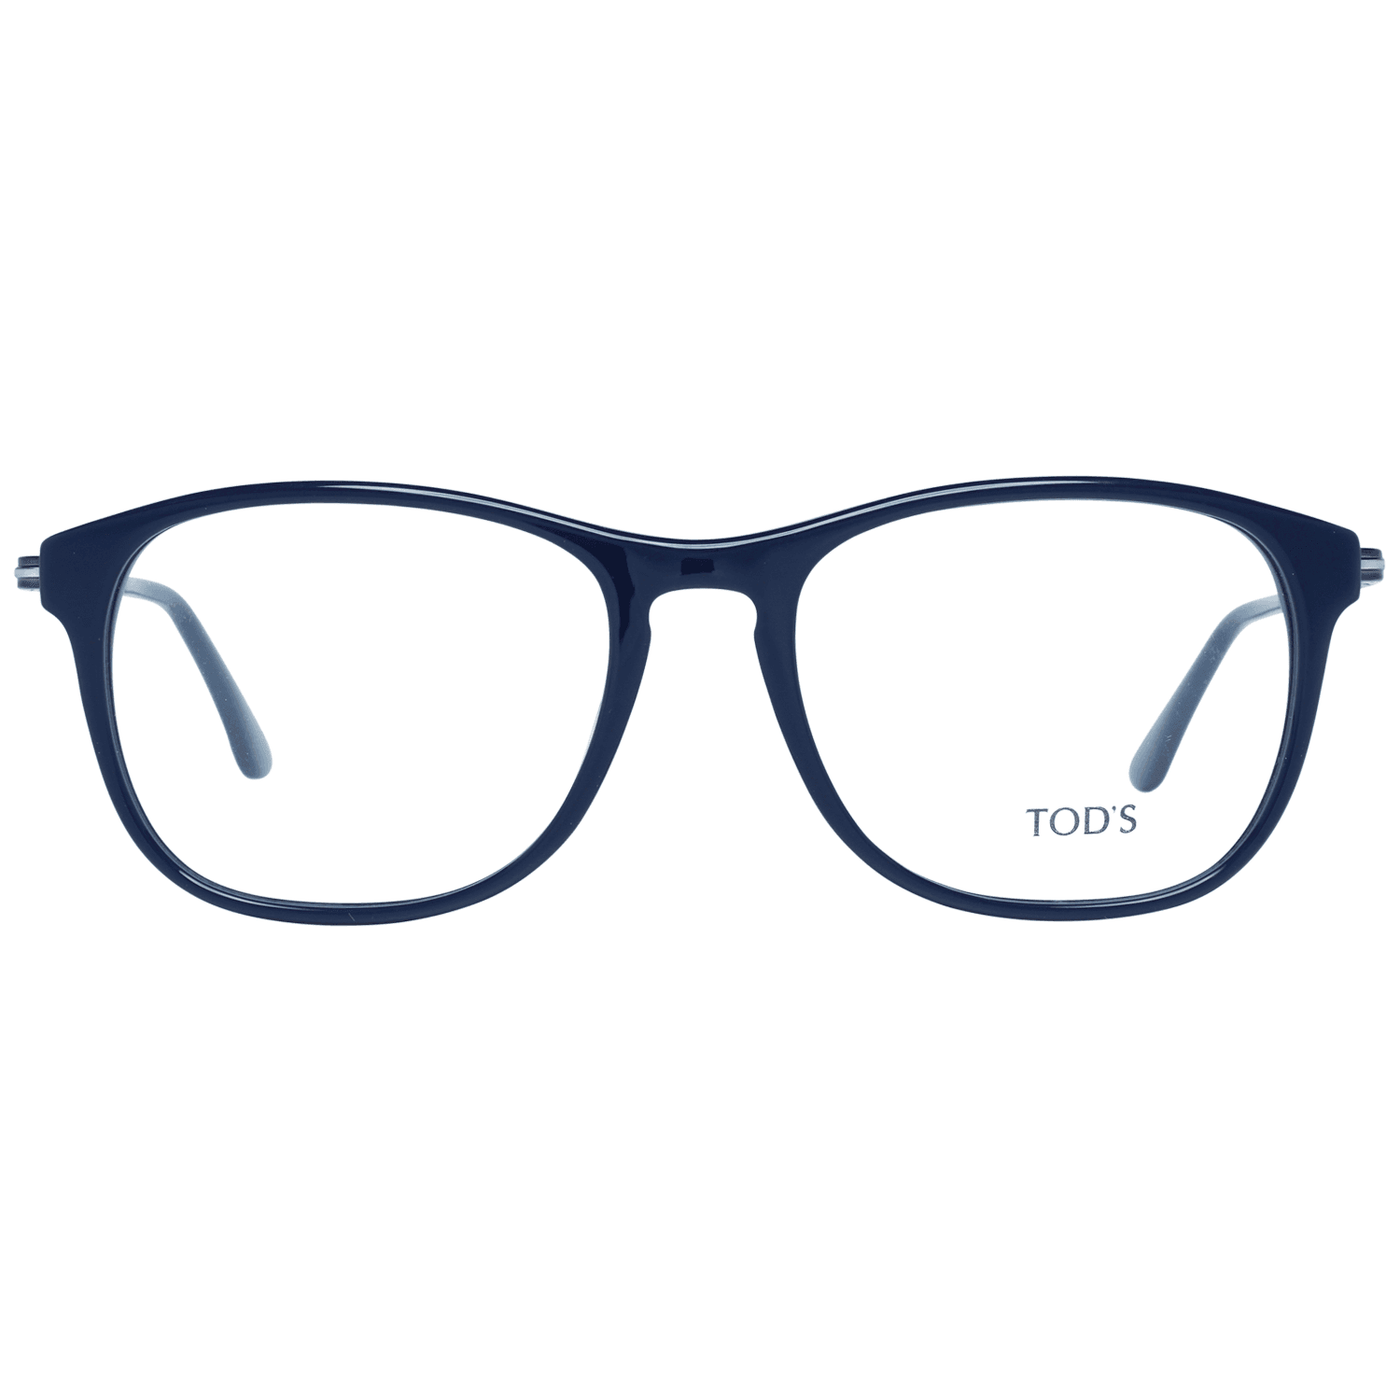 Tod's Blue Men Optical Frames #men, Blue, feed-agegroup-adult, feed-color-blue, feed-gender-male, feed-size-OS, Frames for Men - Frames, Tod's at SEYMAYKA